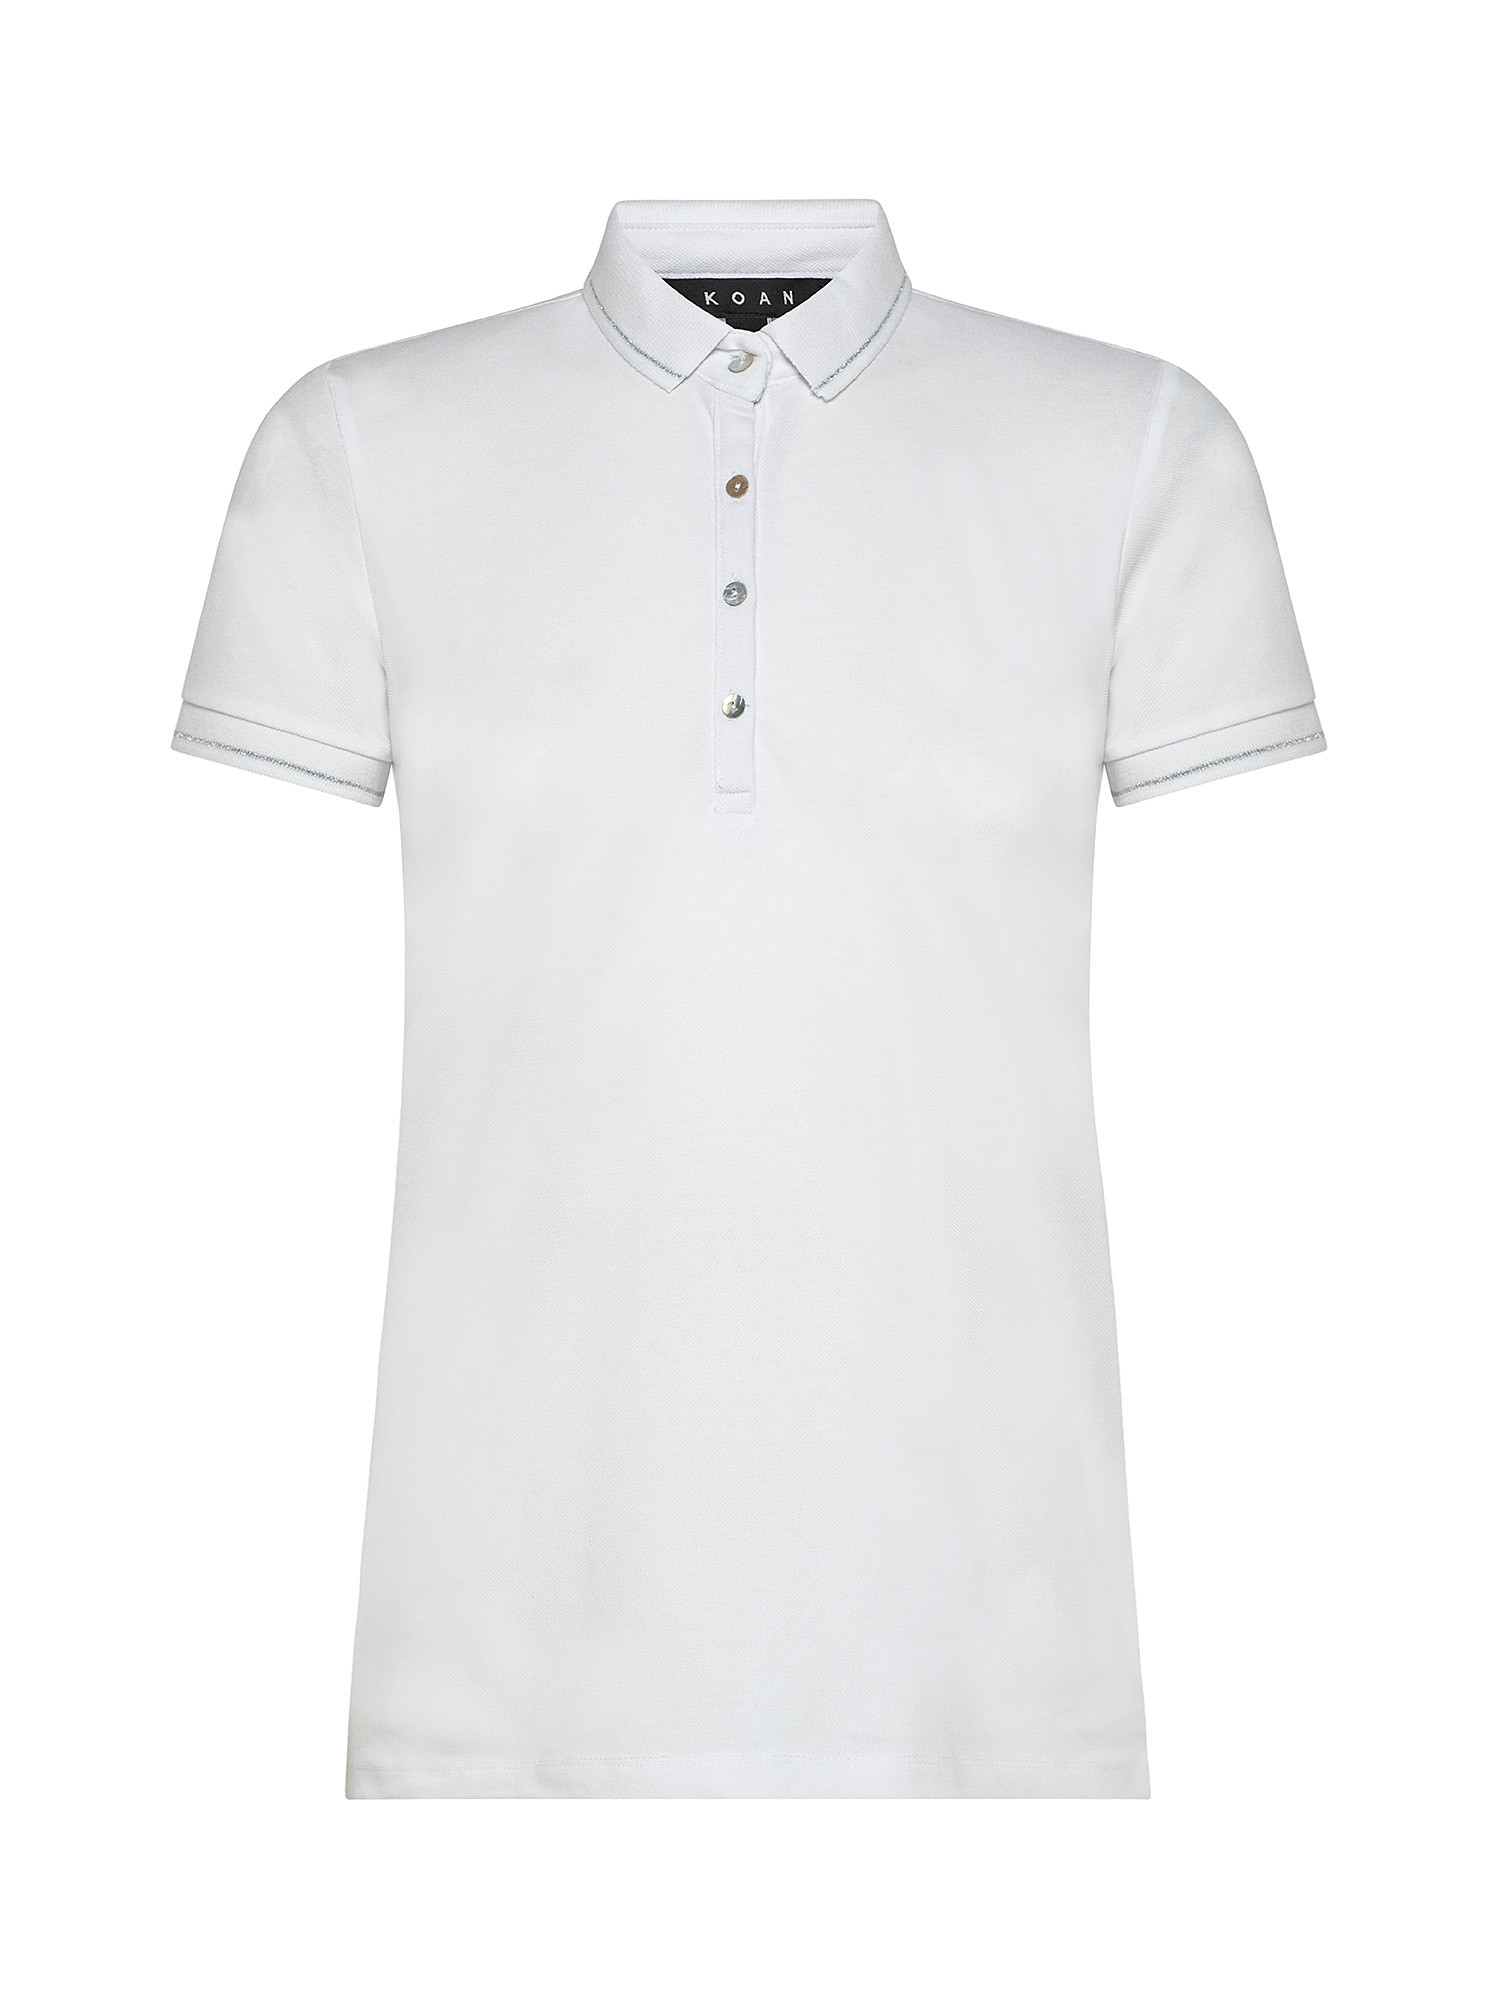 Polo shirt with lurex details, White, large image number 0